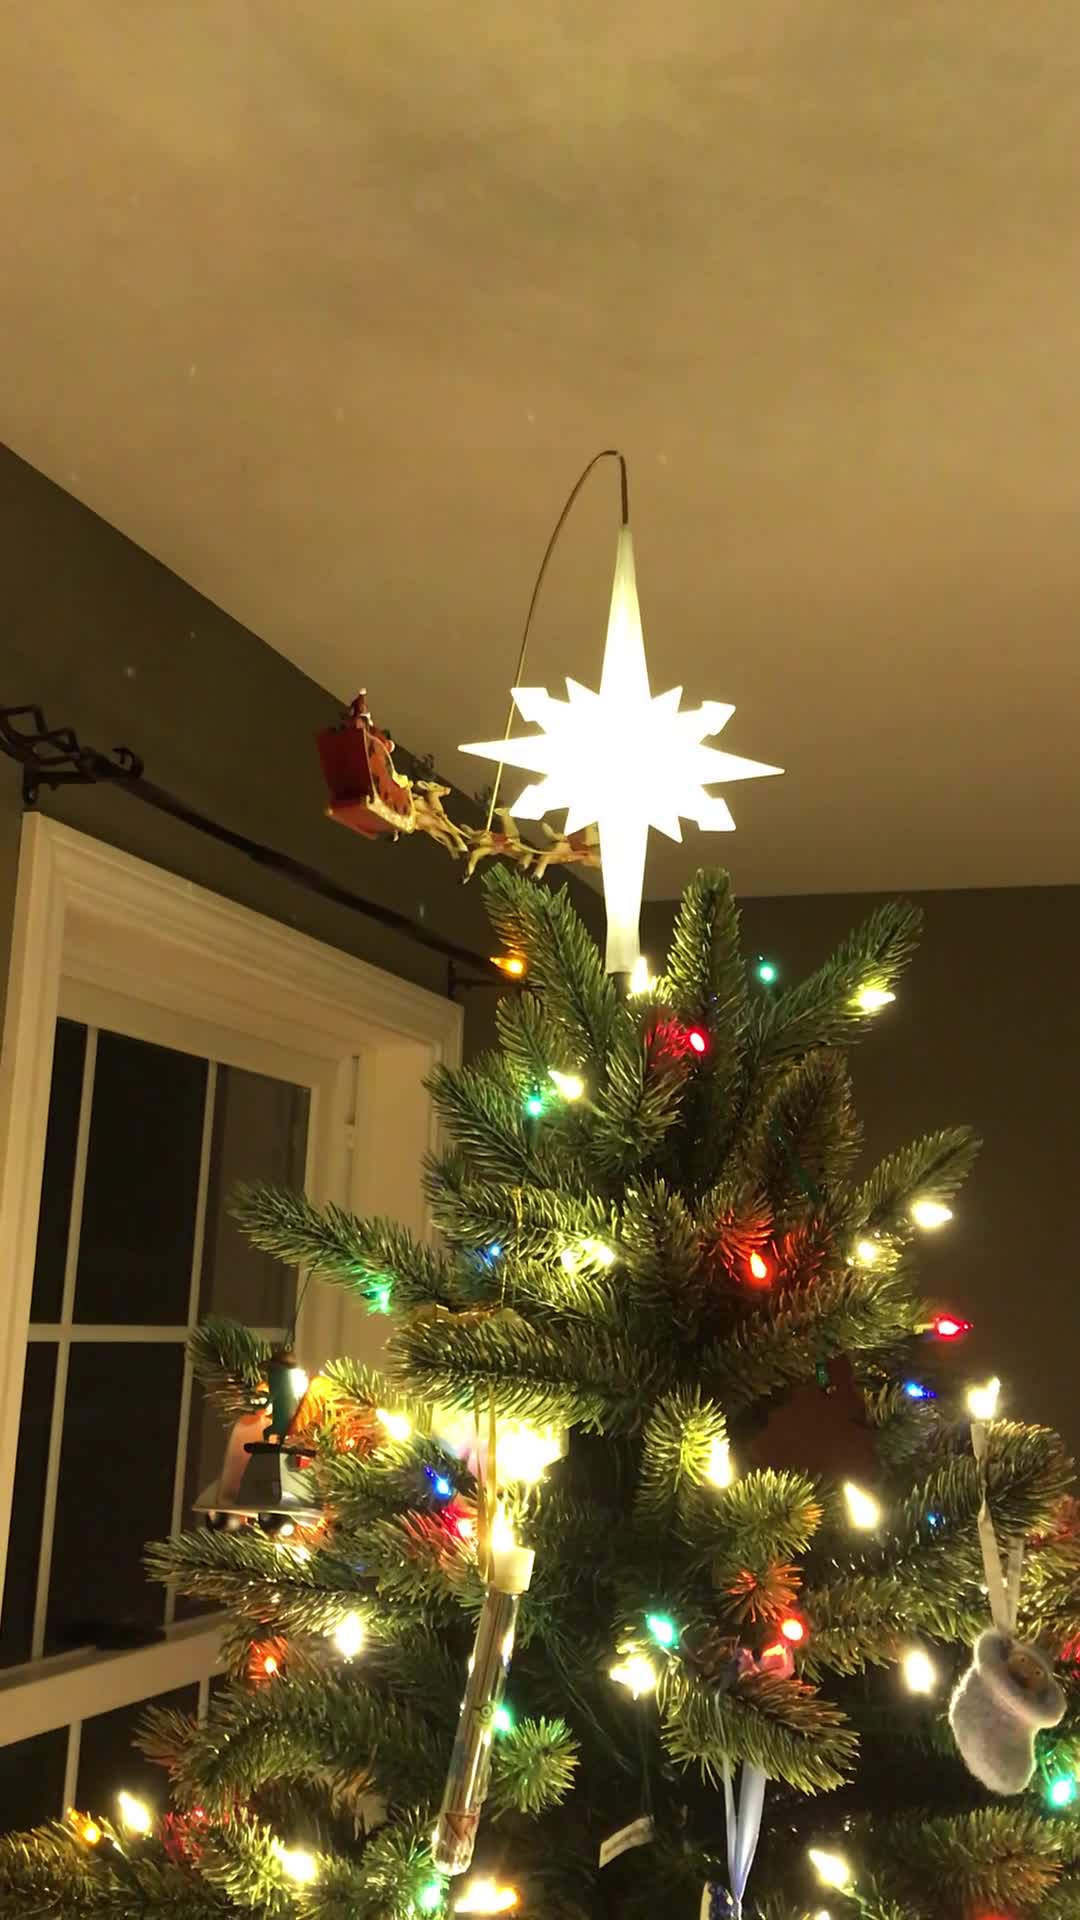 Santa's Sleigh Animated Tree Topper Balsam Hill - For reference, this